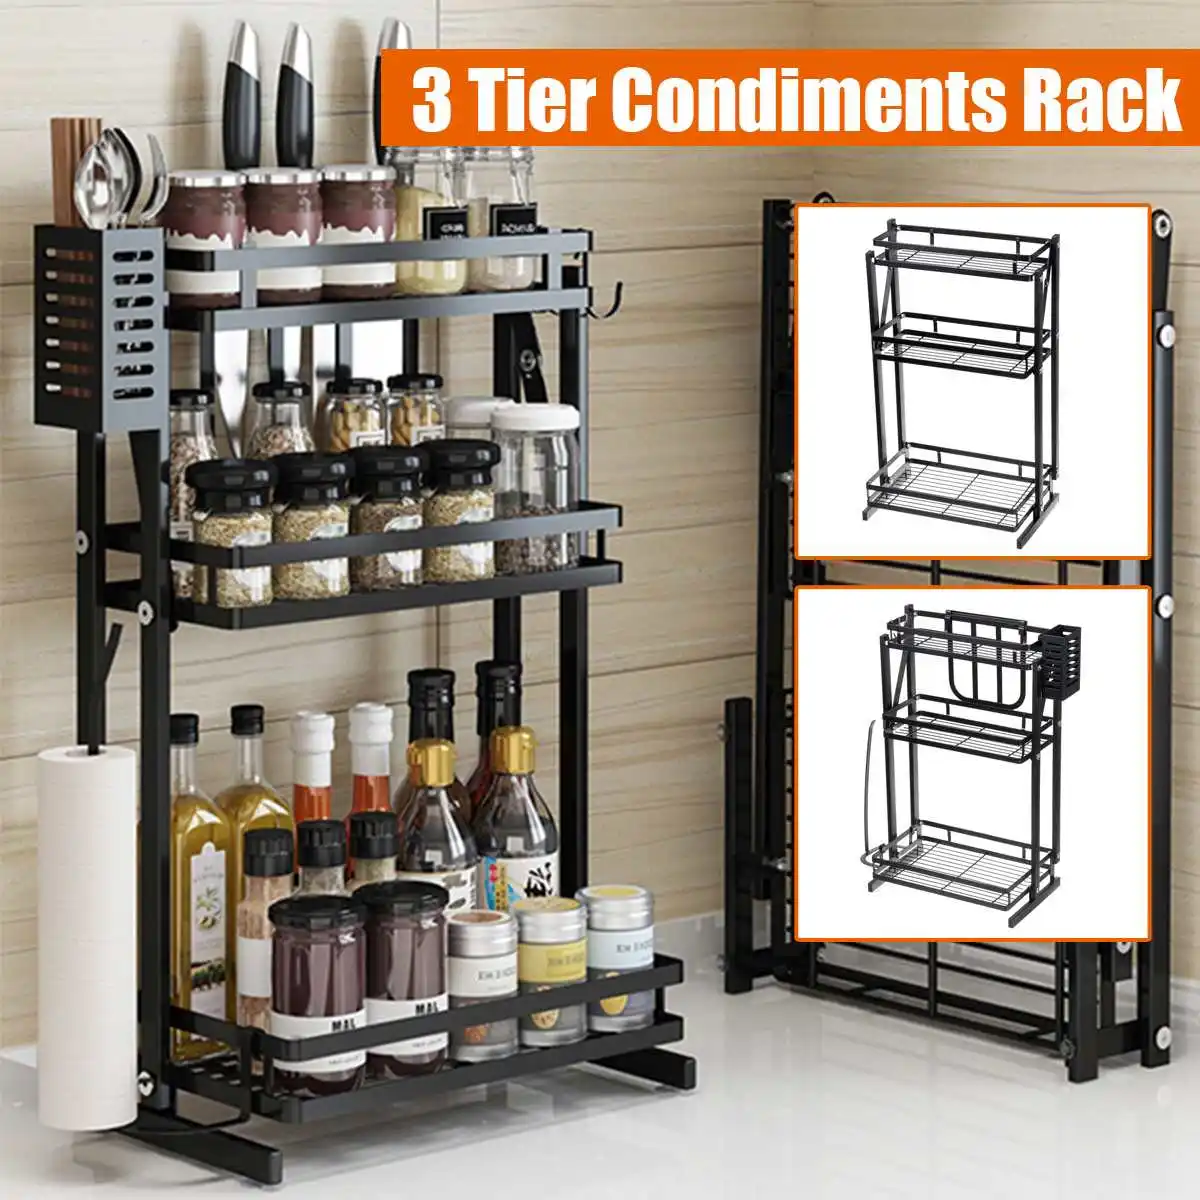 

3 Tier Spice Rack Freestanding Organizer Shelf for Kitchen Countertop Cabinet Pantry Bathroom Storage Organization for Spice Can